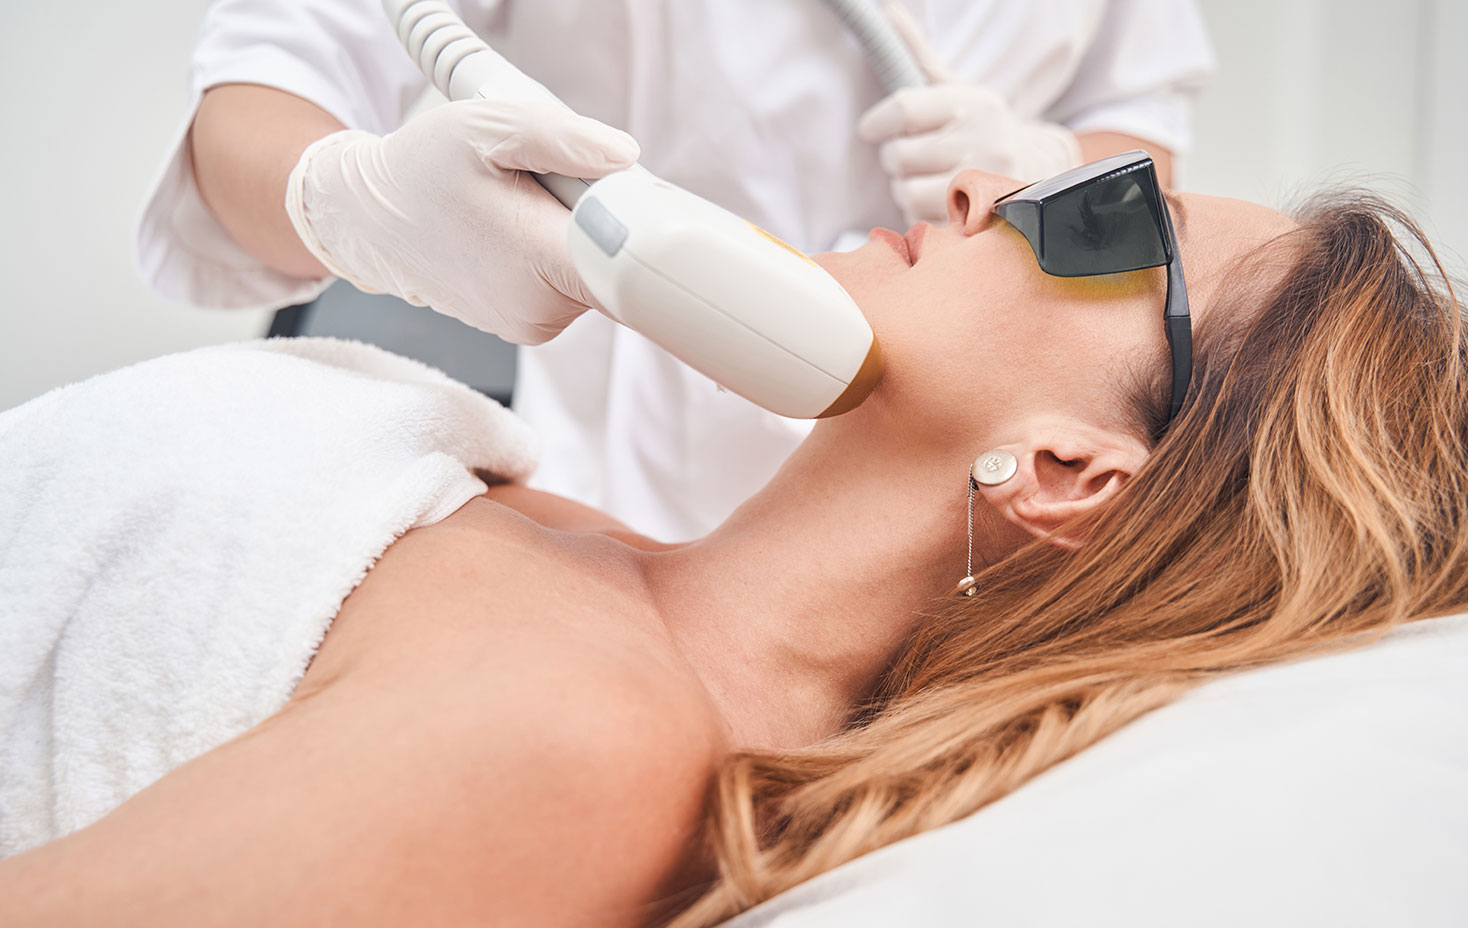 Experience more youthful, glowing skin with a Laser Facial at Hello Laser Skin and Body Medspa.